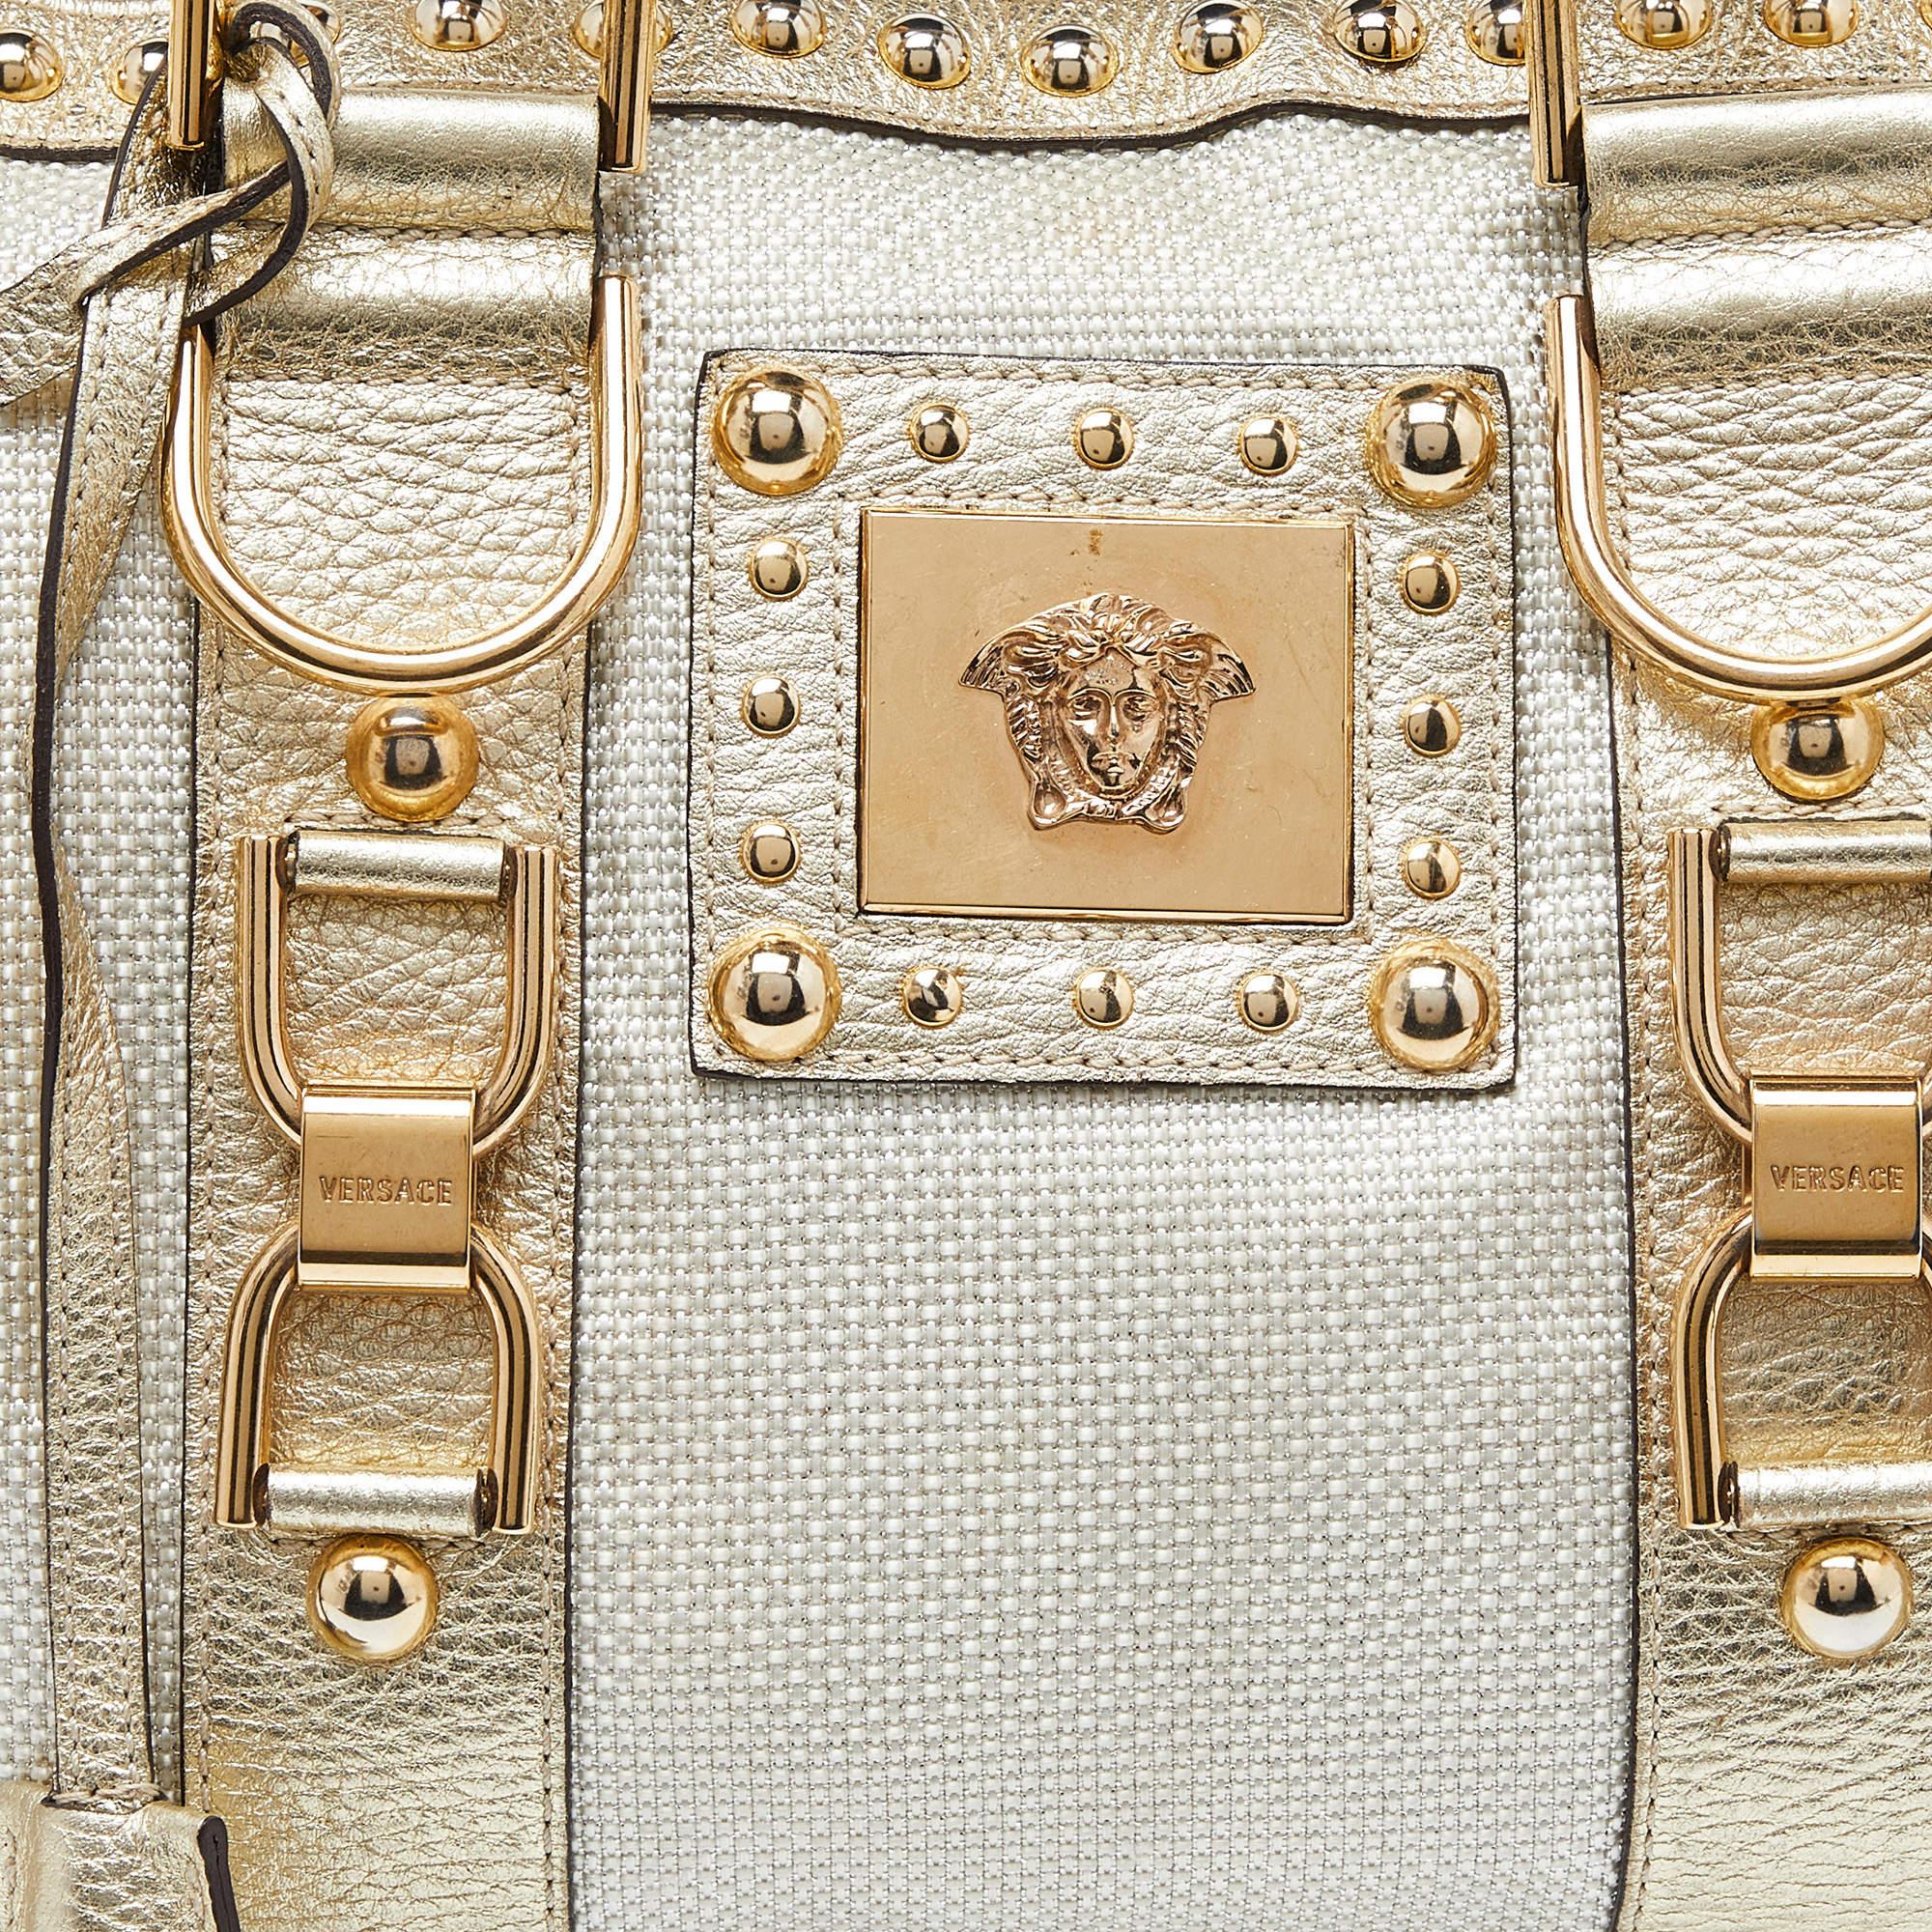 Versace Beige/Gold Nylon and Leather Studded Madonna Satchel For Sale 6